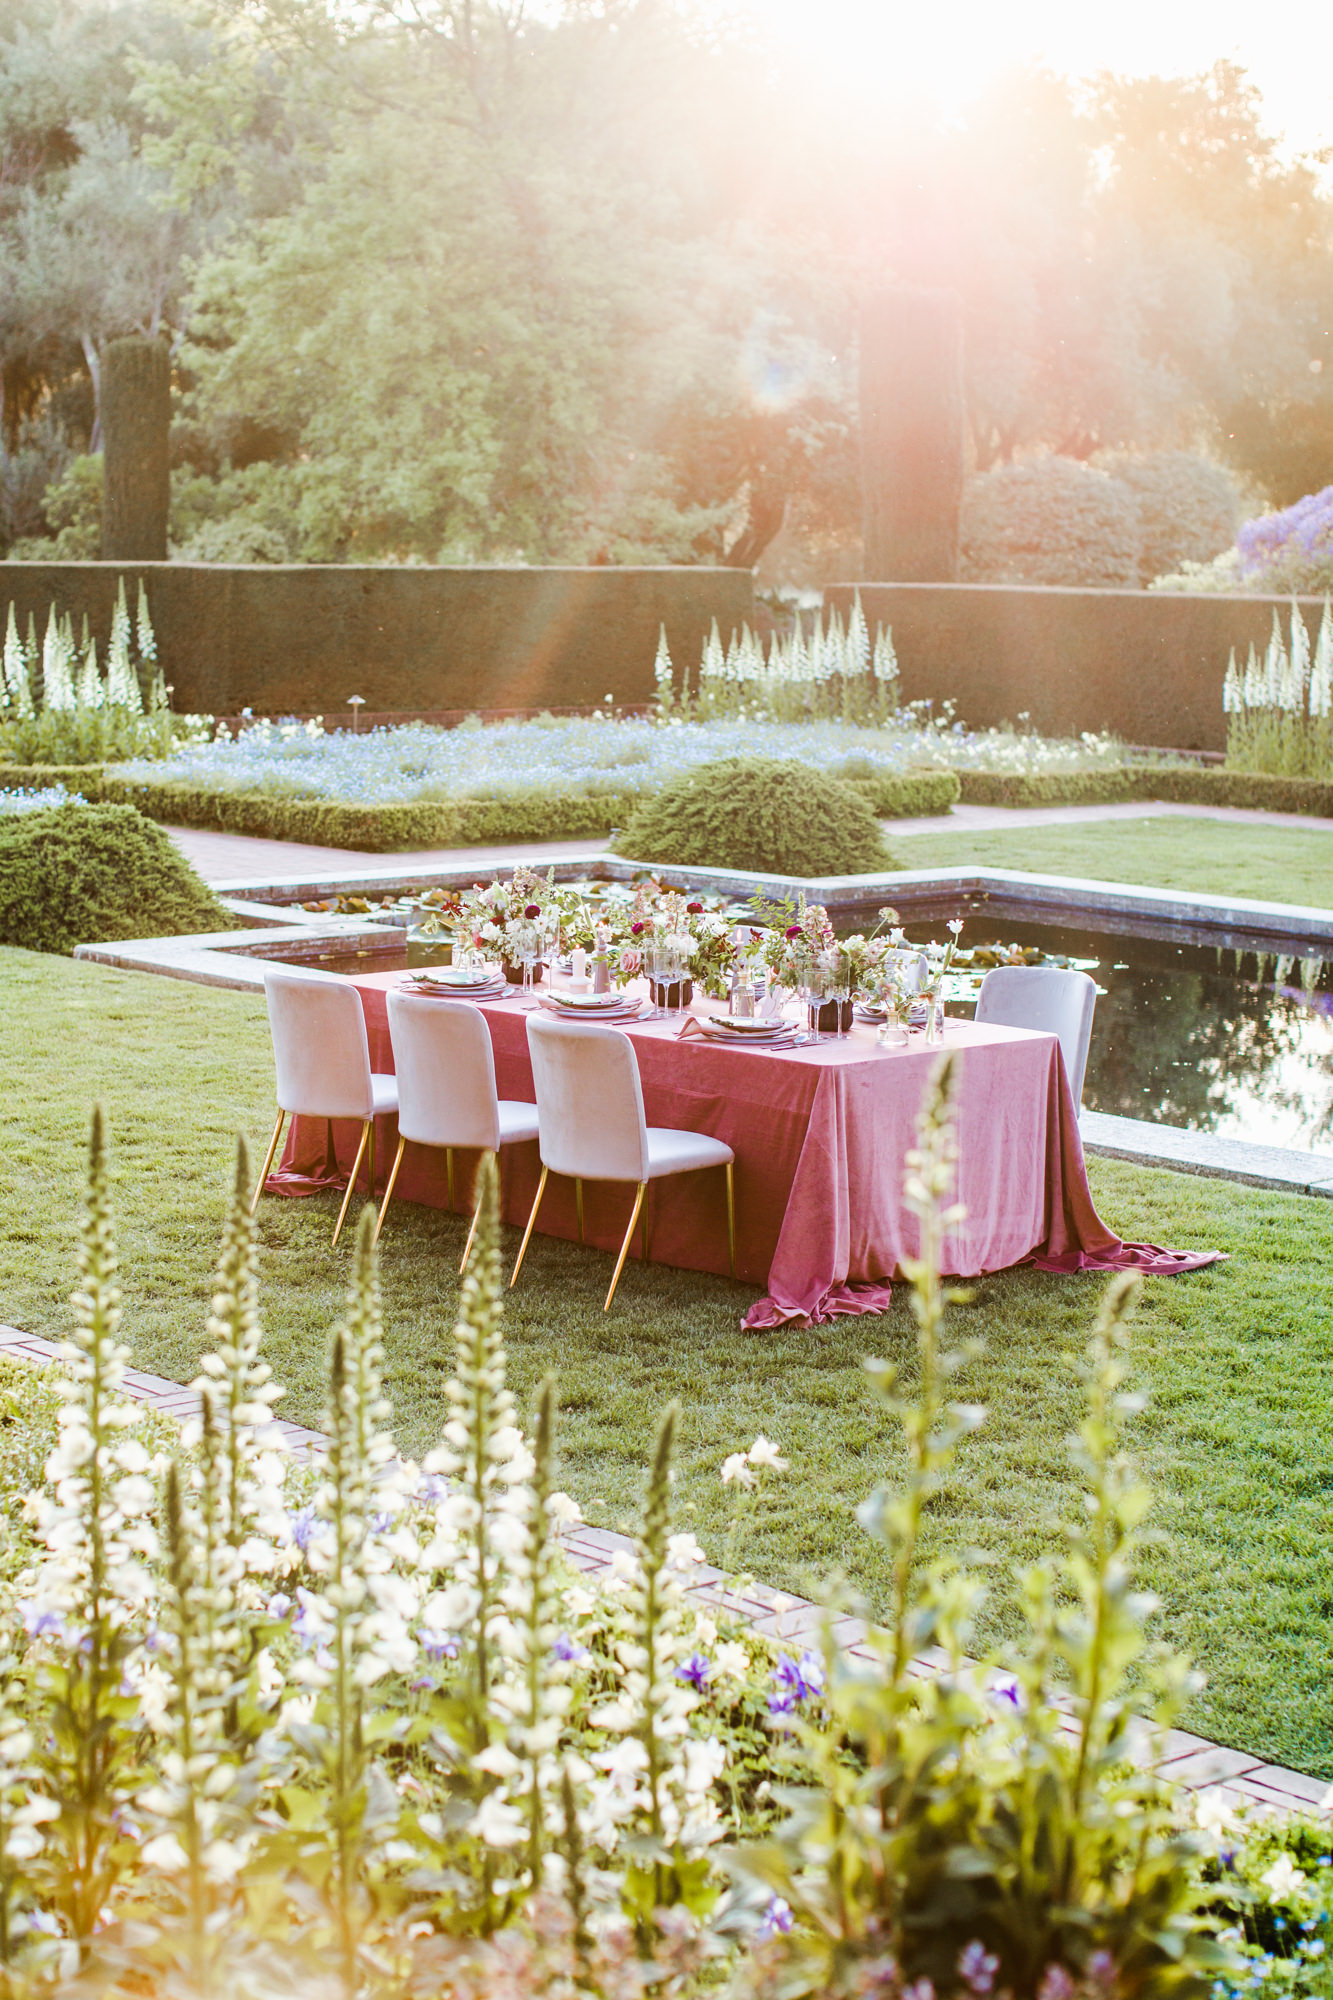 Charming mauve tablescape for a Filoli Garden wedding right by the beautiful pond surrounded by flowers